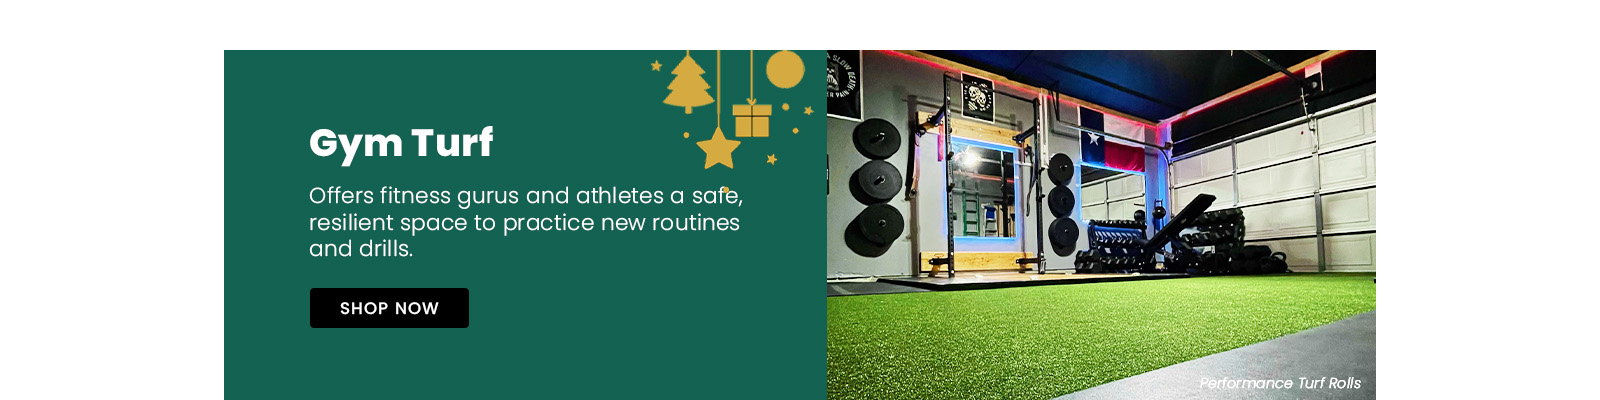 Gym Turf. Offers fitness gurus and athletes a safe, resilient space to practice new routines and drills. Shop Now